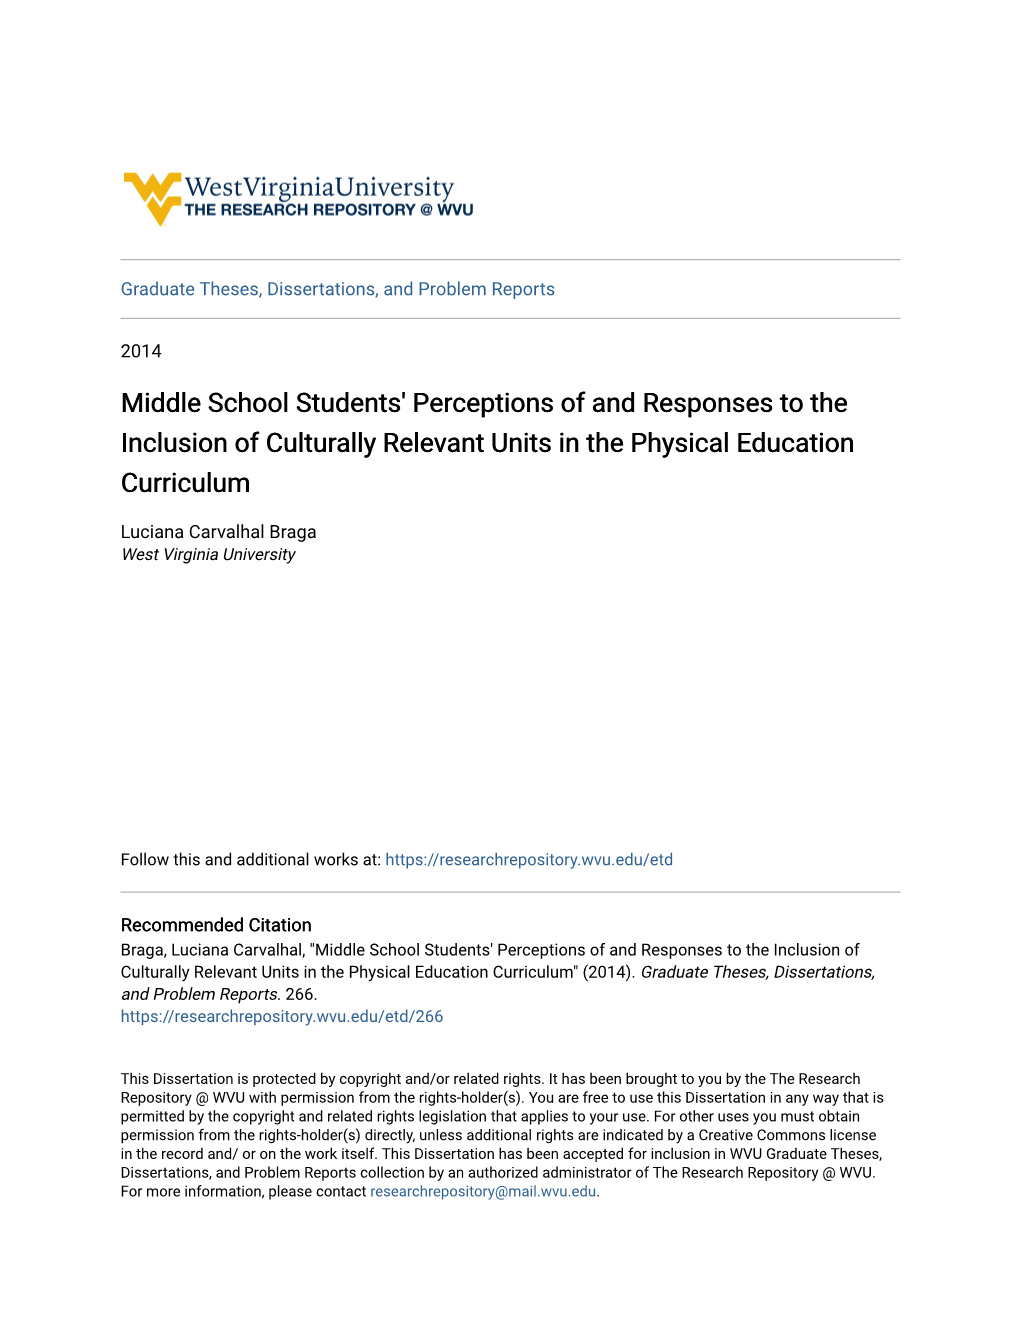 Middle School Students' Perceptions of and Responses to the Inclusion of Culturally Relevant Units in the Physical Education Curriculum